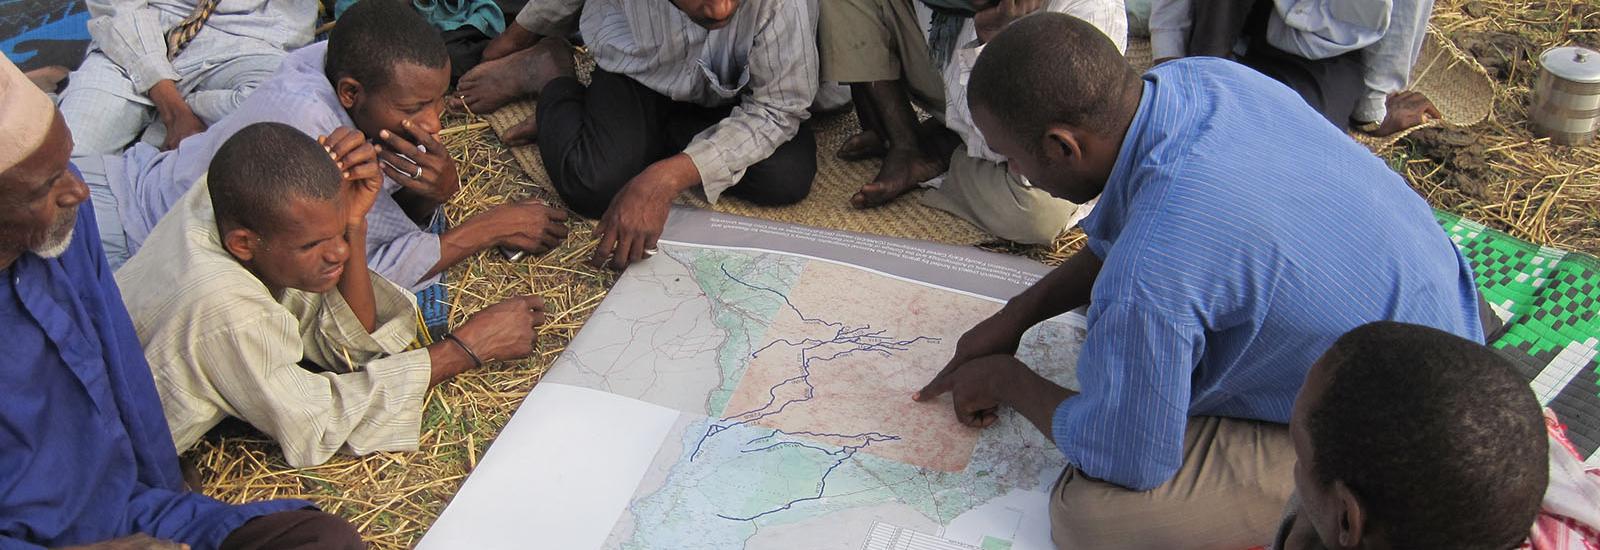 Researcher goes over maps with locals abroad